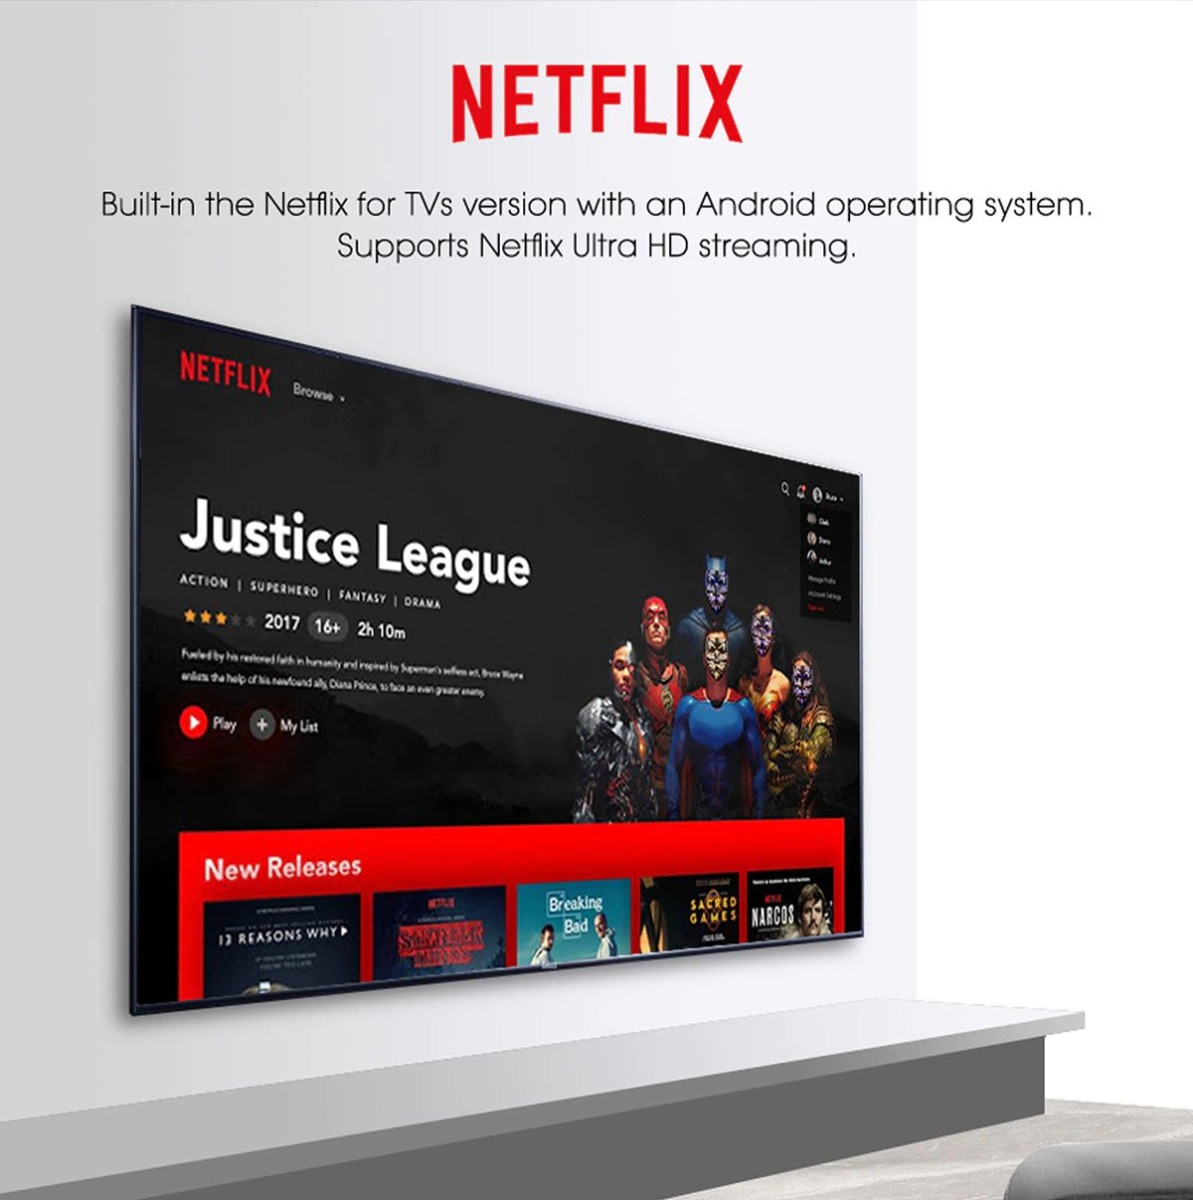 NETFLIX Built-in the Netflix for TVs version with an Android operating system. Supports Netflix Ultra HD streaming.